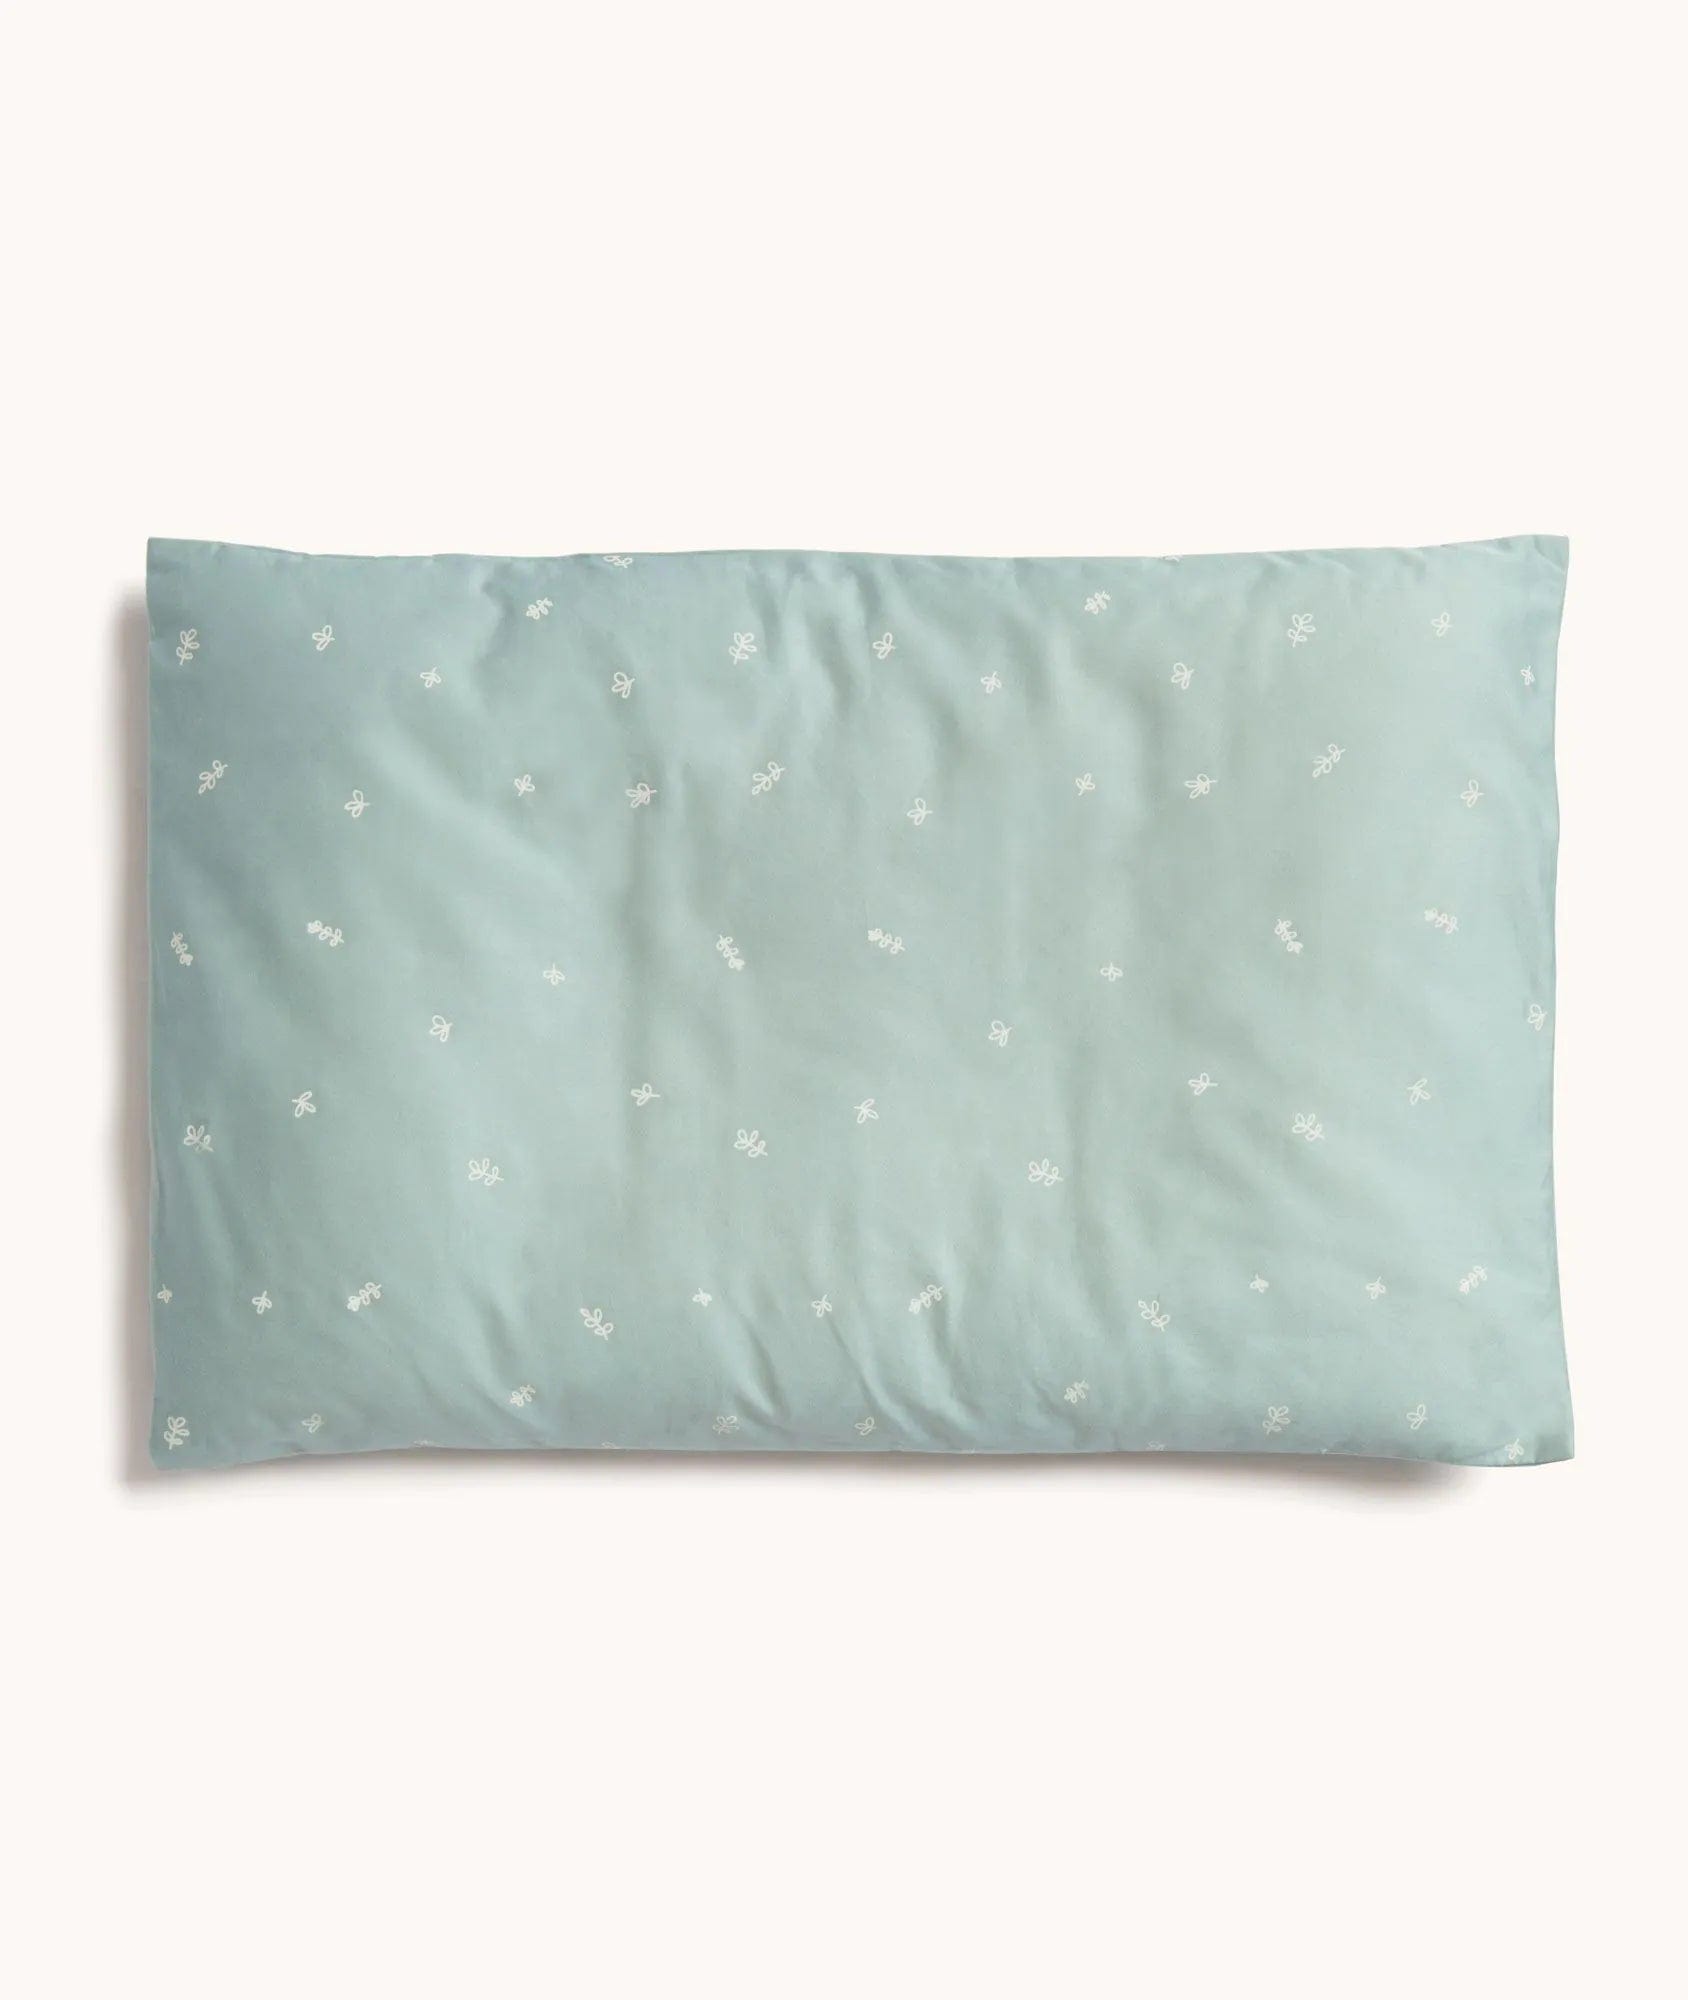 Pillow & Case For Toddler By ergoPouch - Sage - Stylemykid.com